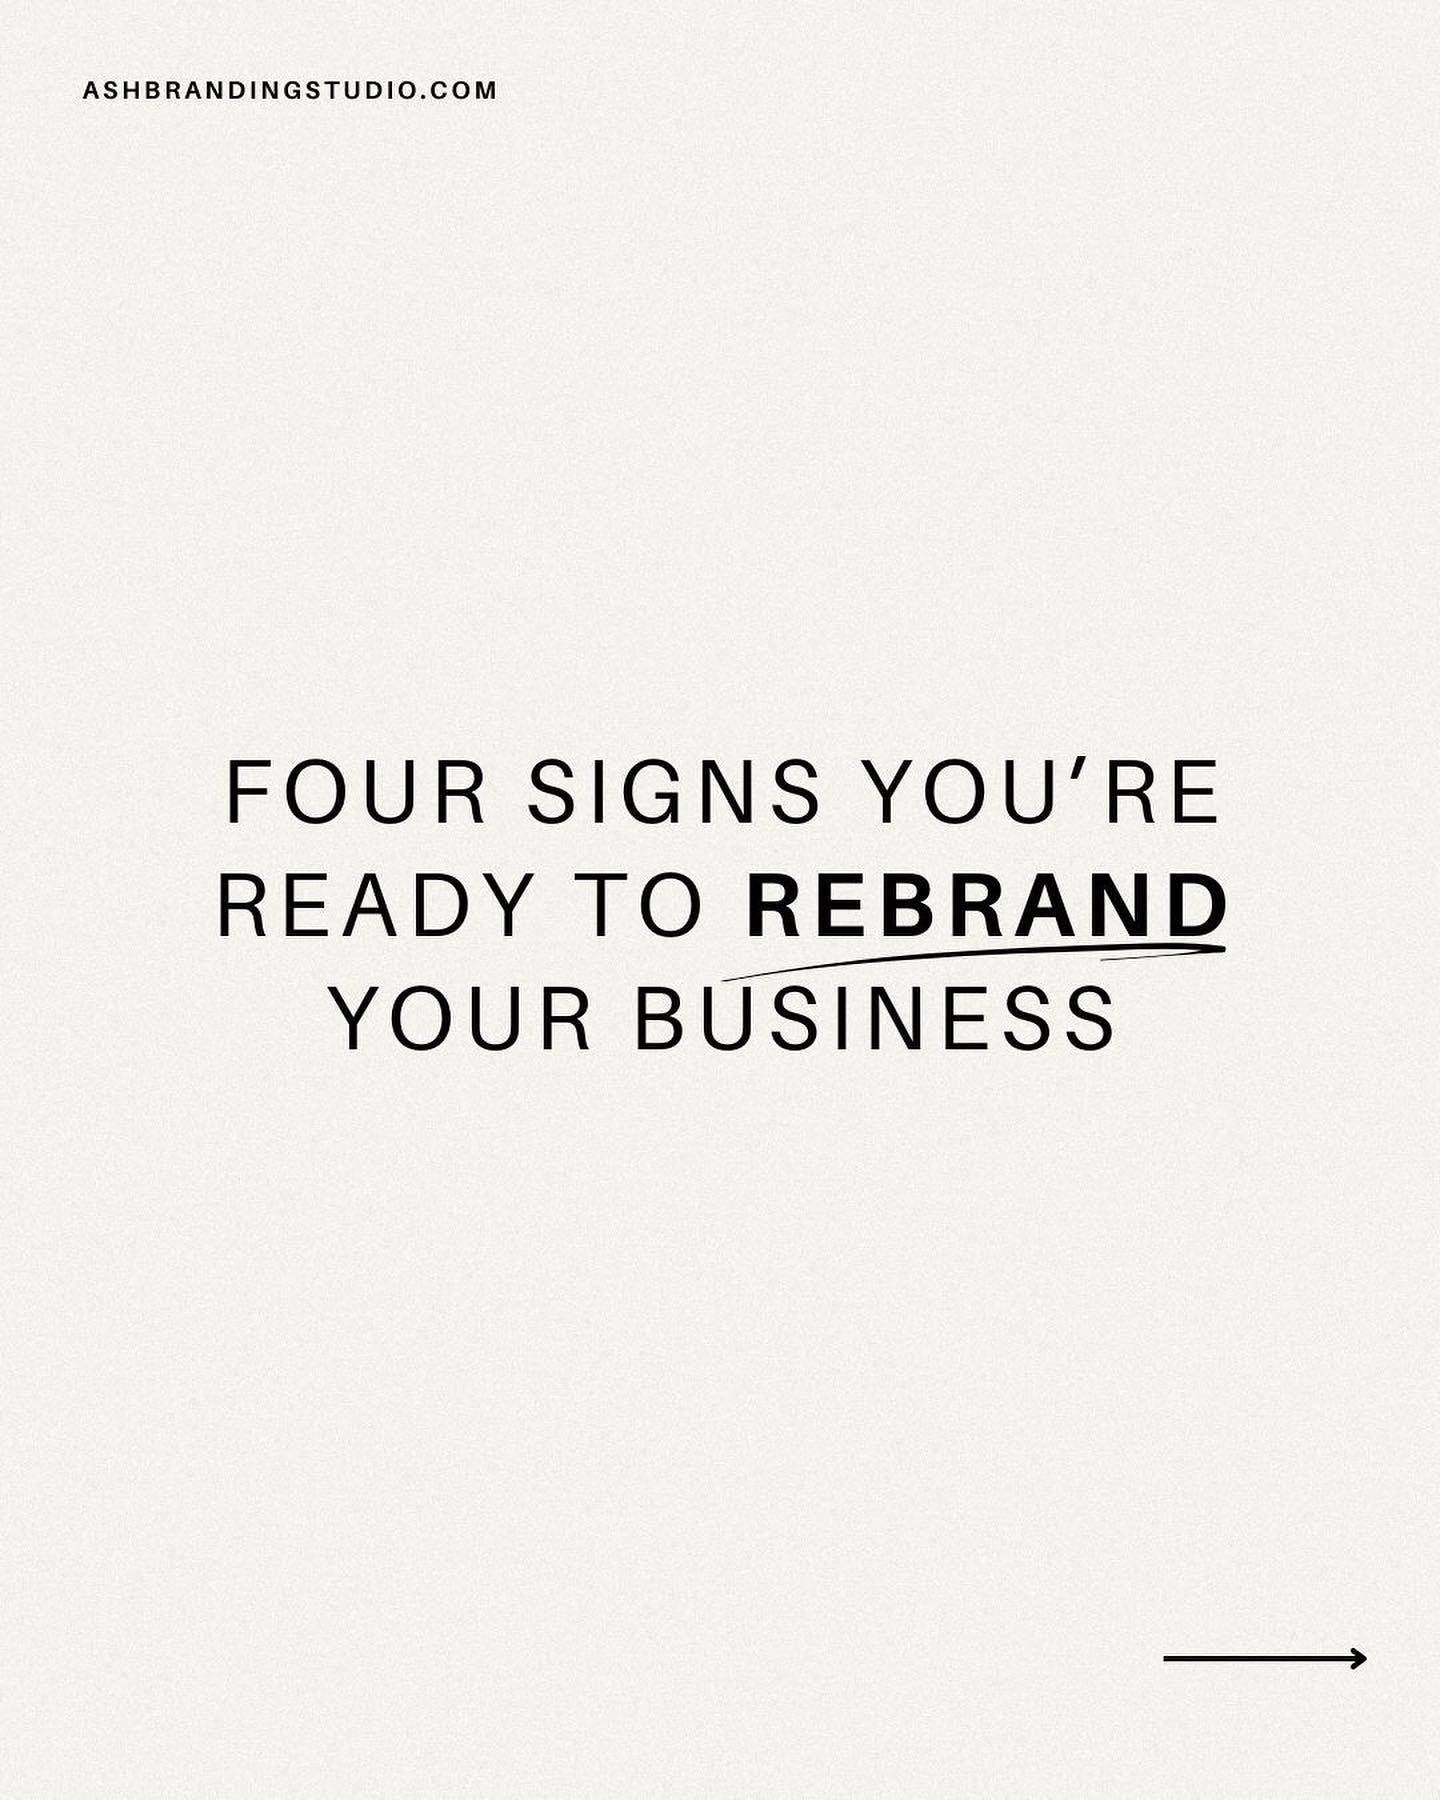 Do you wish your brand identity looked less &lsquo;messy&rsquo;? 

Here are four signs that indicate you might be ready for a rebrand:

1. The evolution of your business goals and values is not reflected in the brand identity: If your business has ev